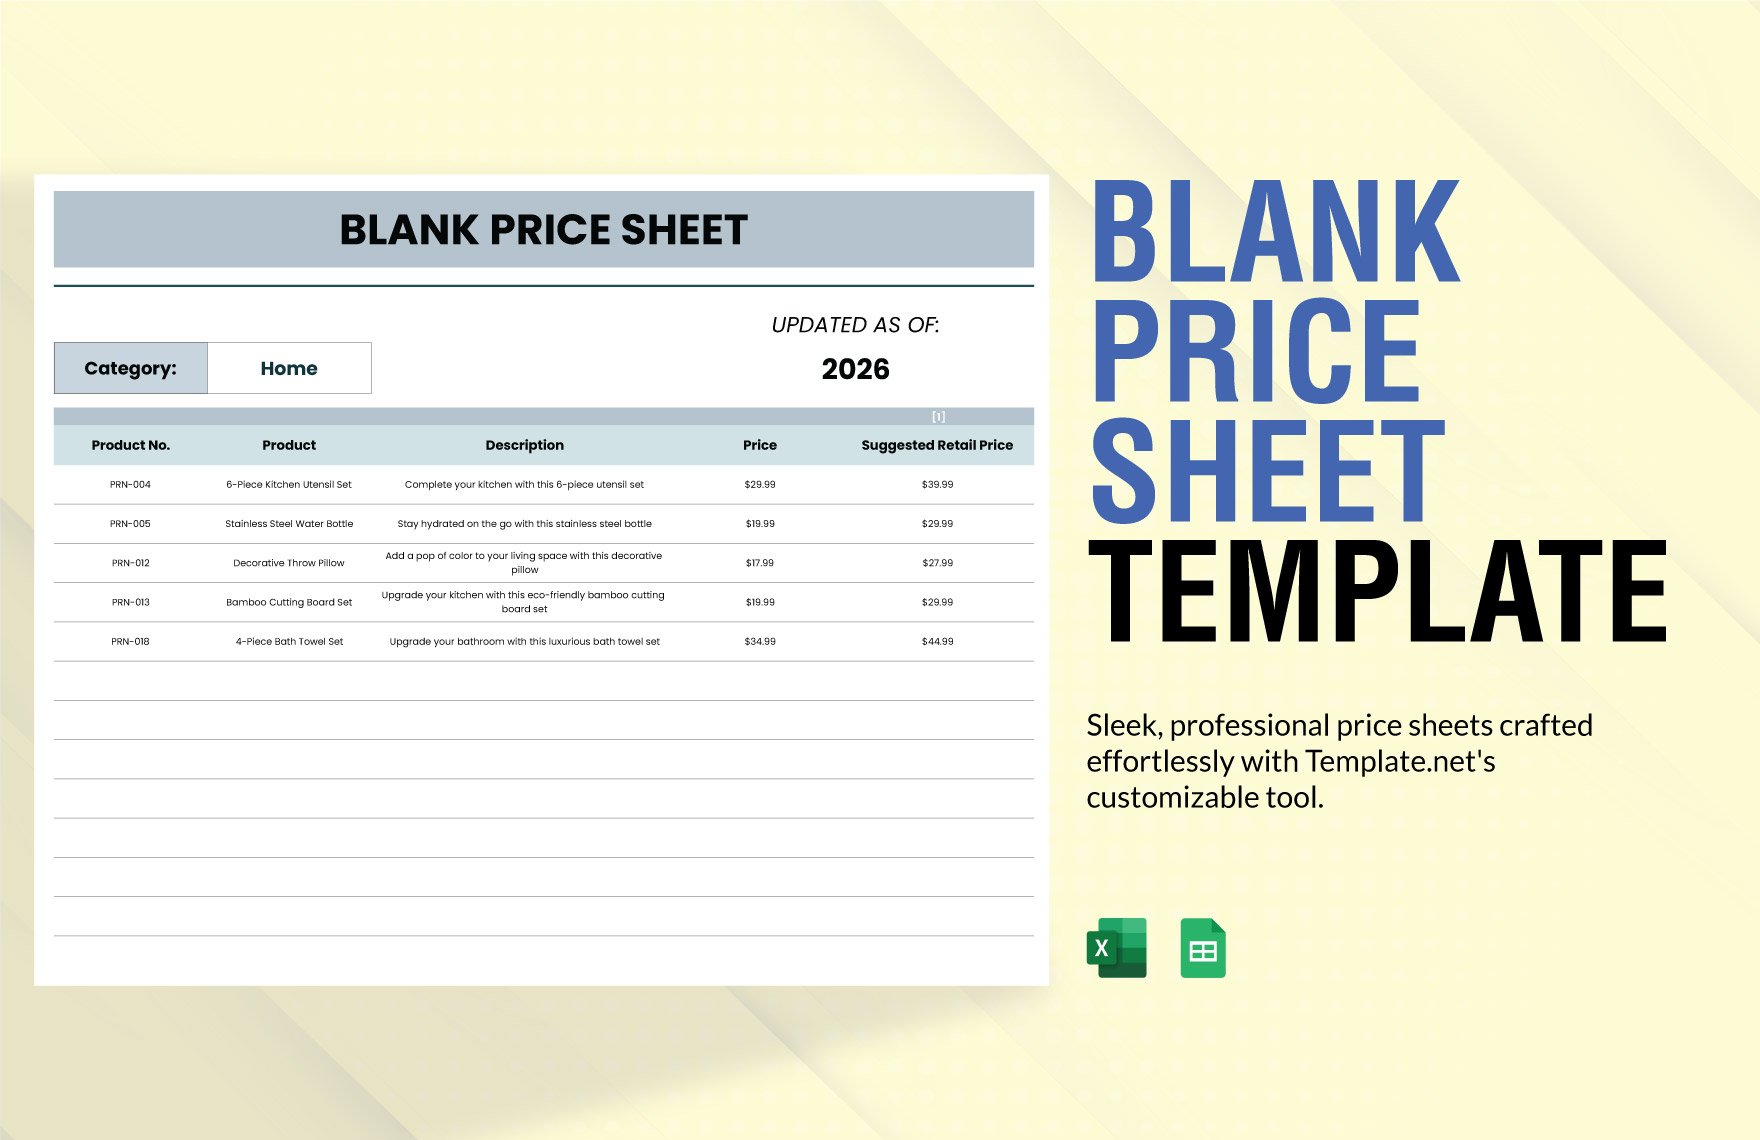 Blank Price Sheet Template in Excel, Google Sheets